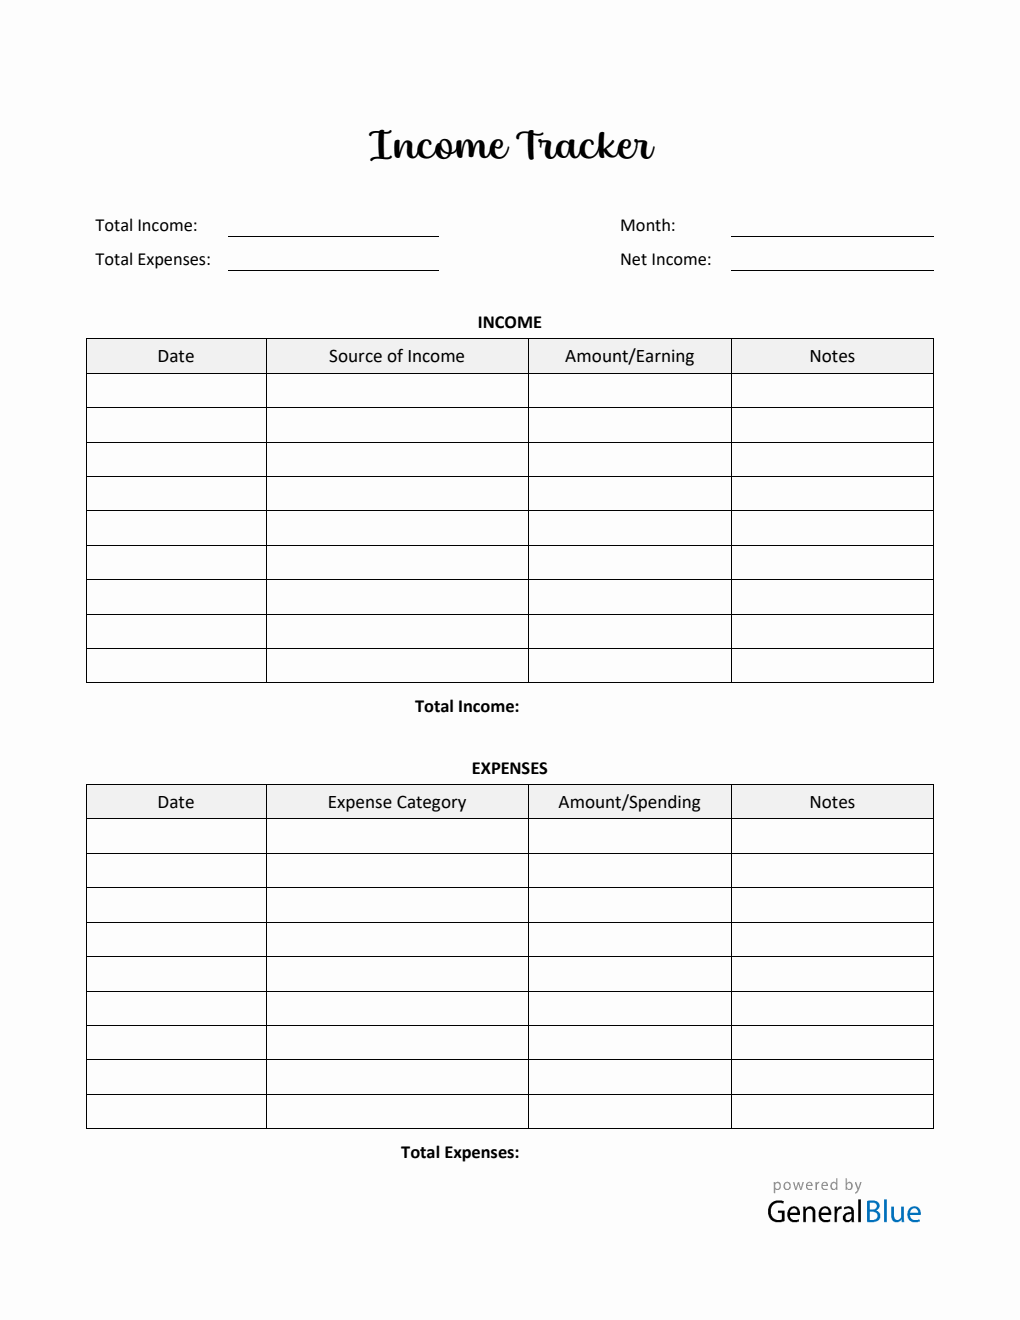 Printable Income Tracker in Word